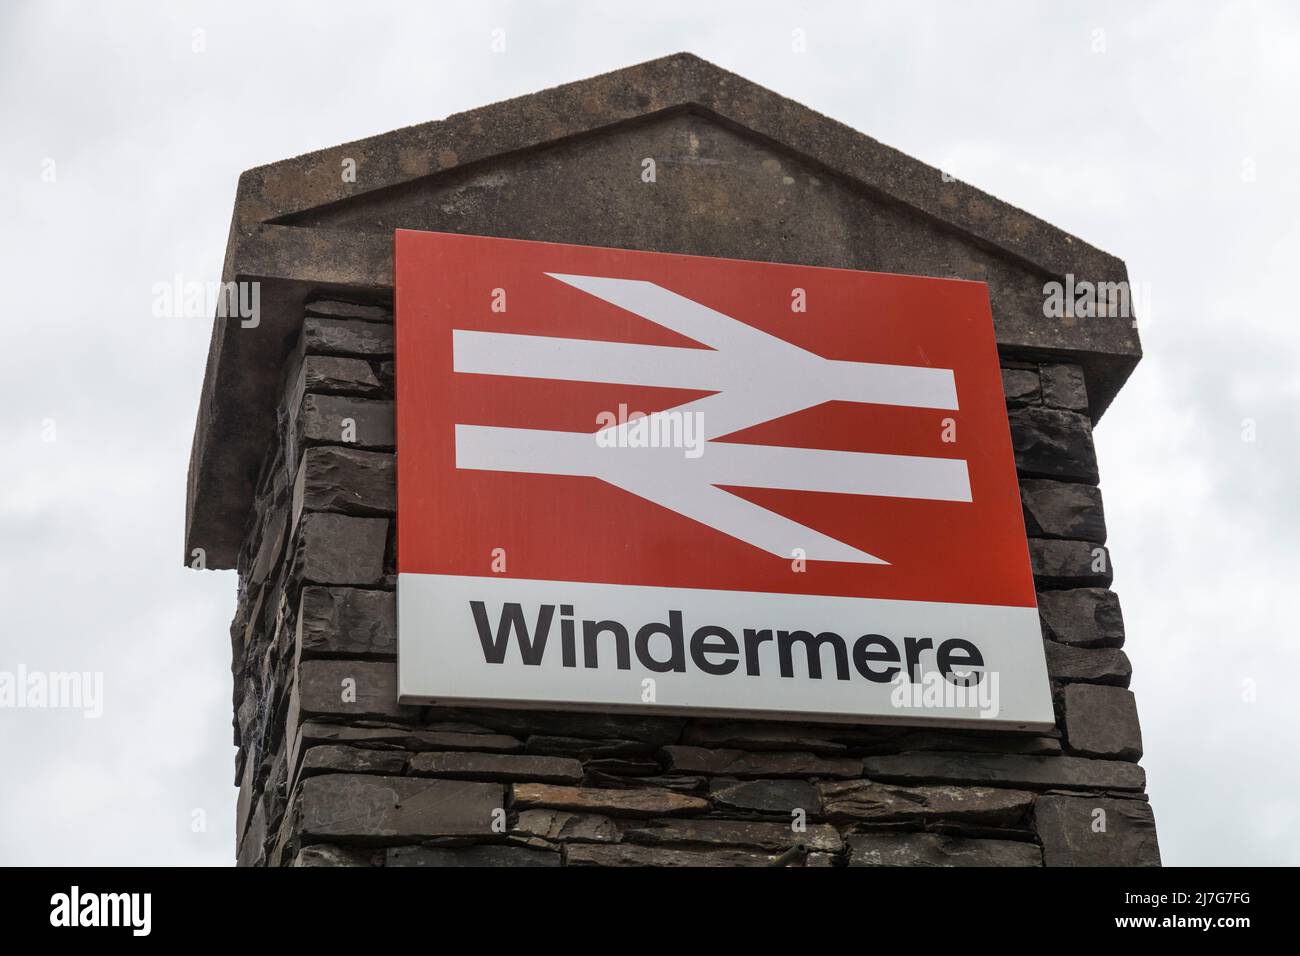 Sign for Windermere Railway station in Windermere,Lake District,England,UK Stock Photo